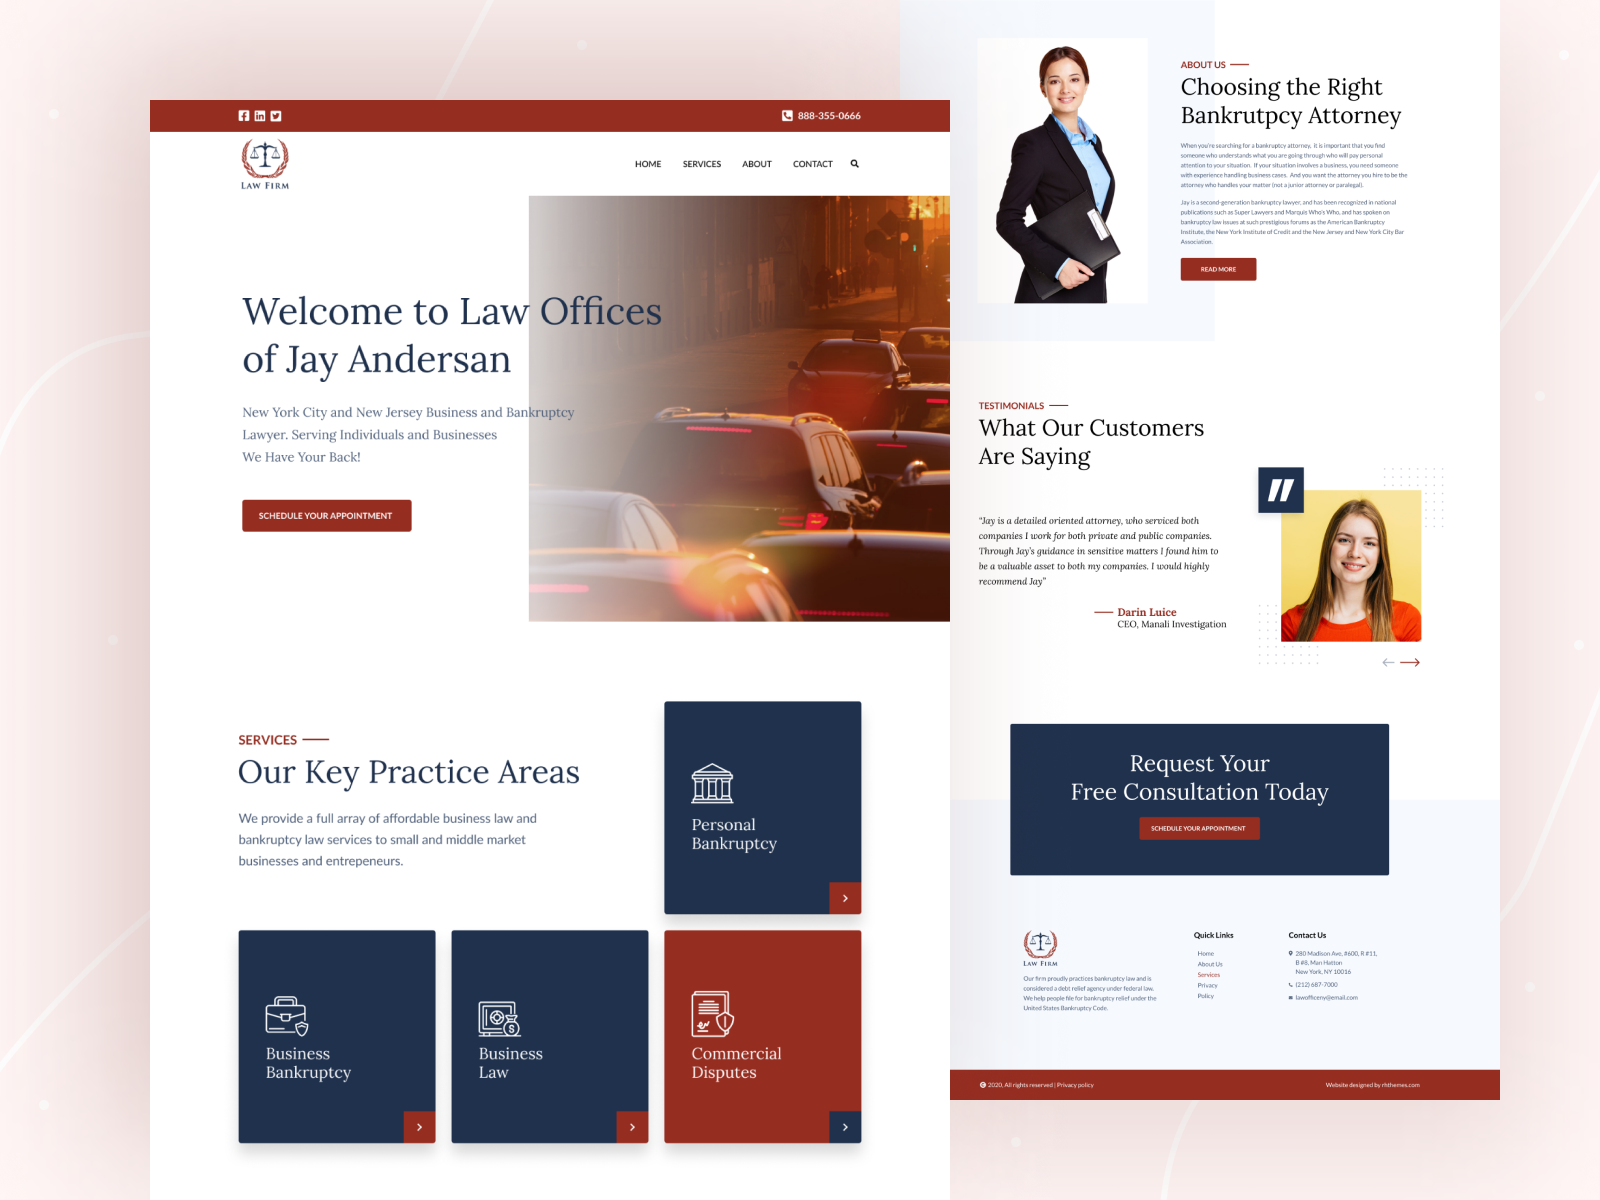 You Can Depend On Law Firm Website Design - Web Design For Lawyers